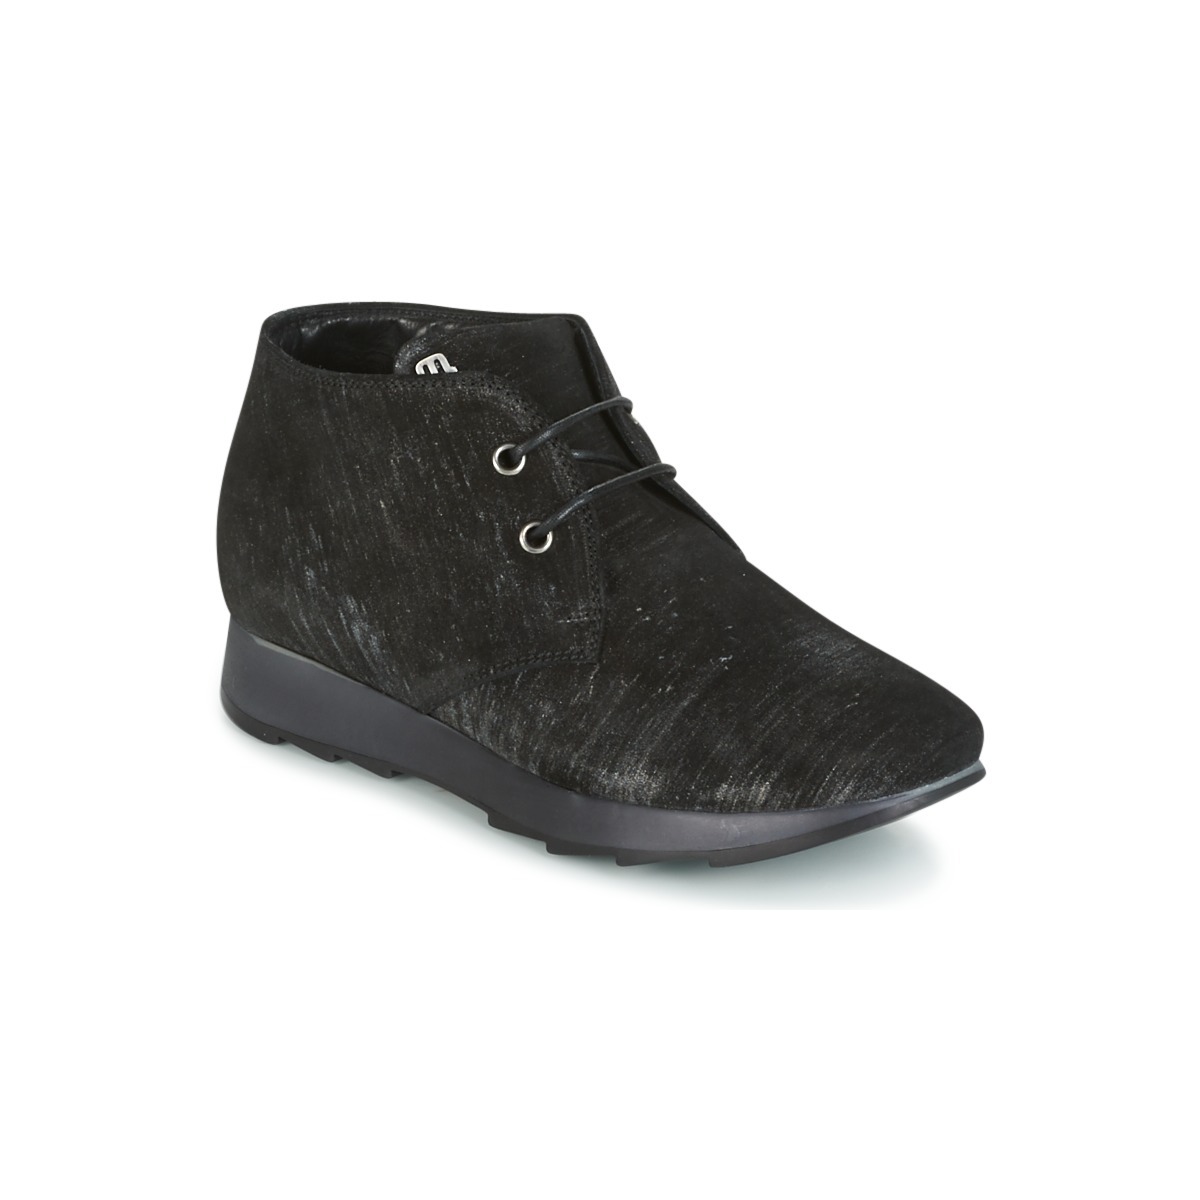 Maruti - Ladies Boots in Black from Spartoo GOOFASH